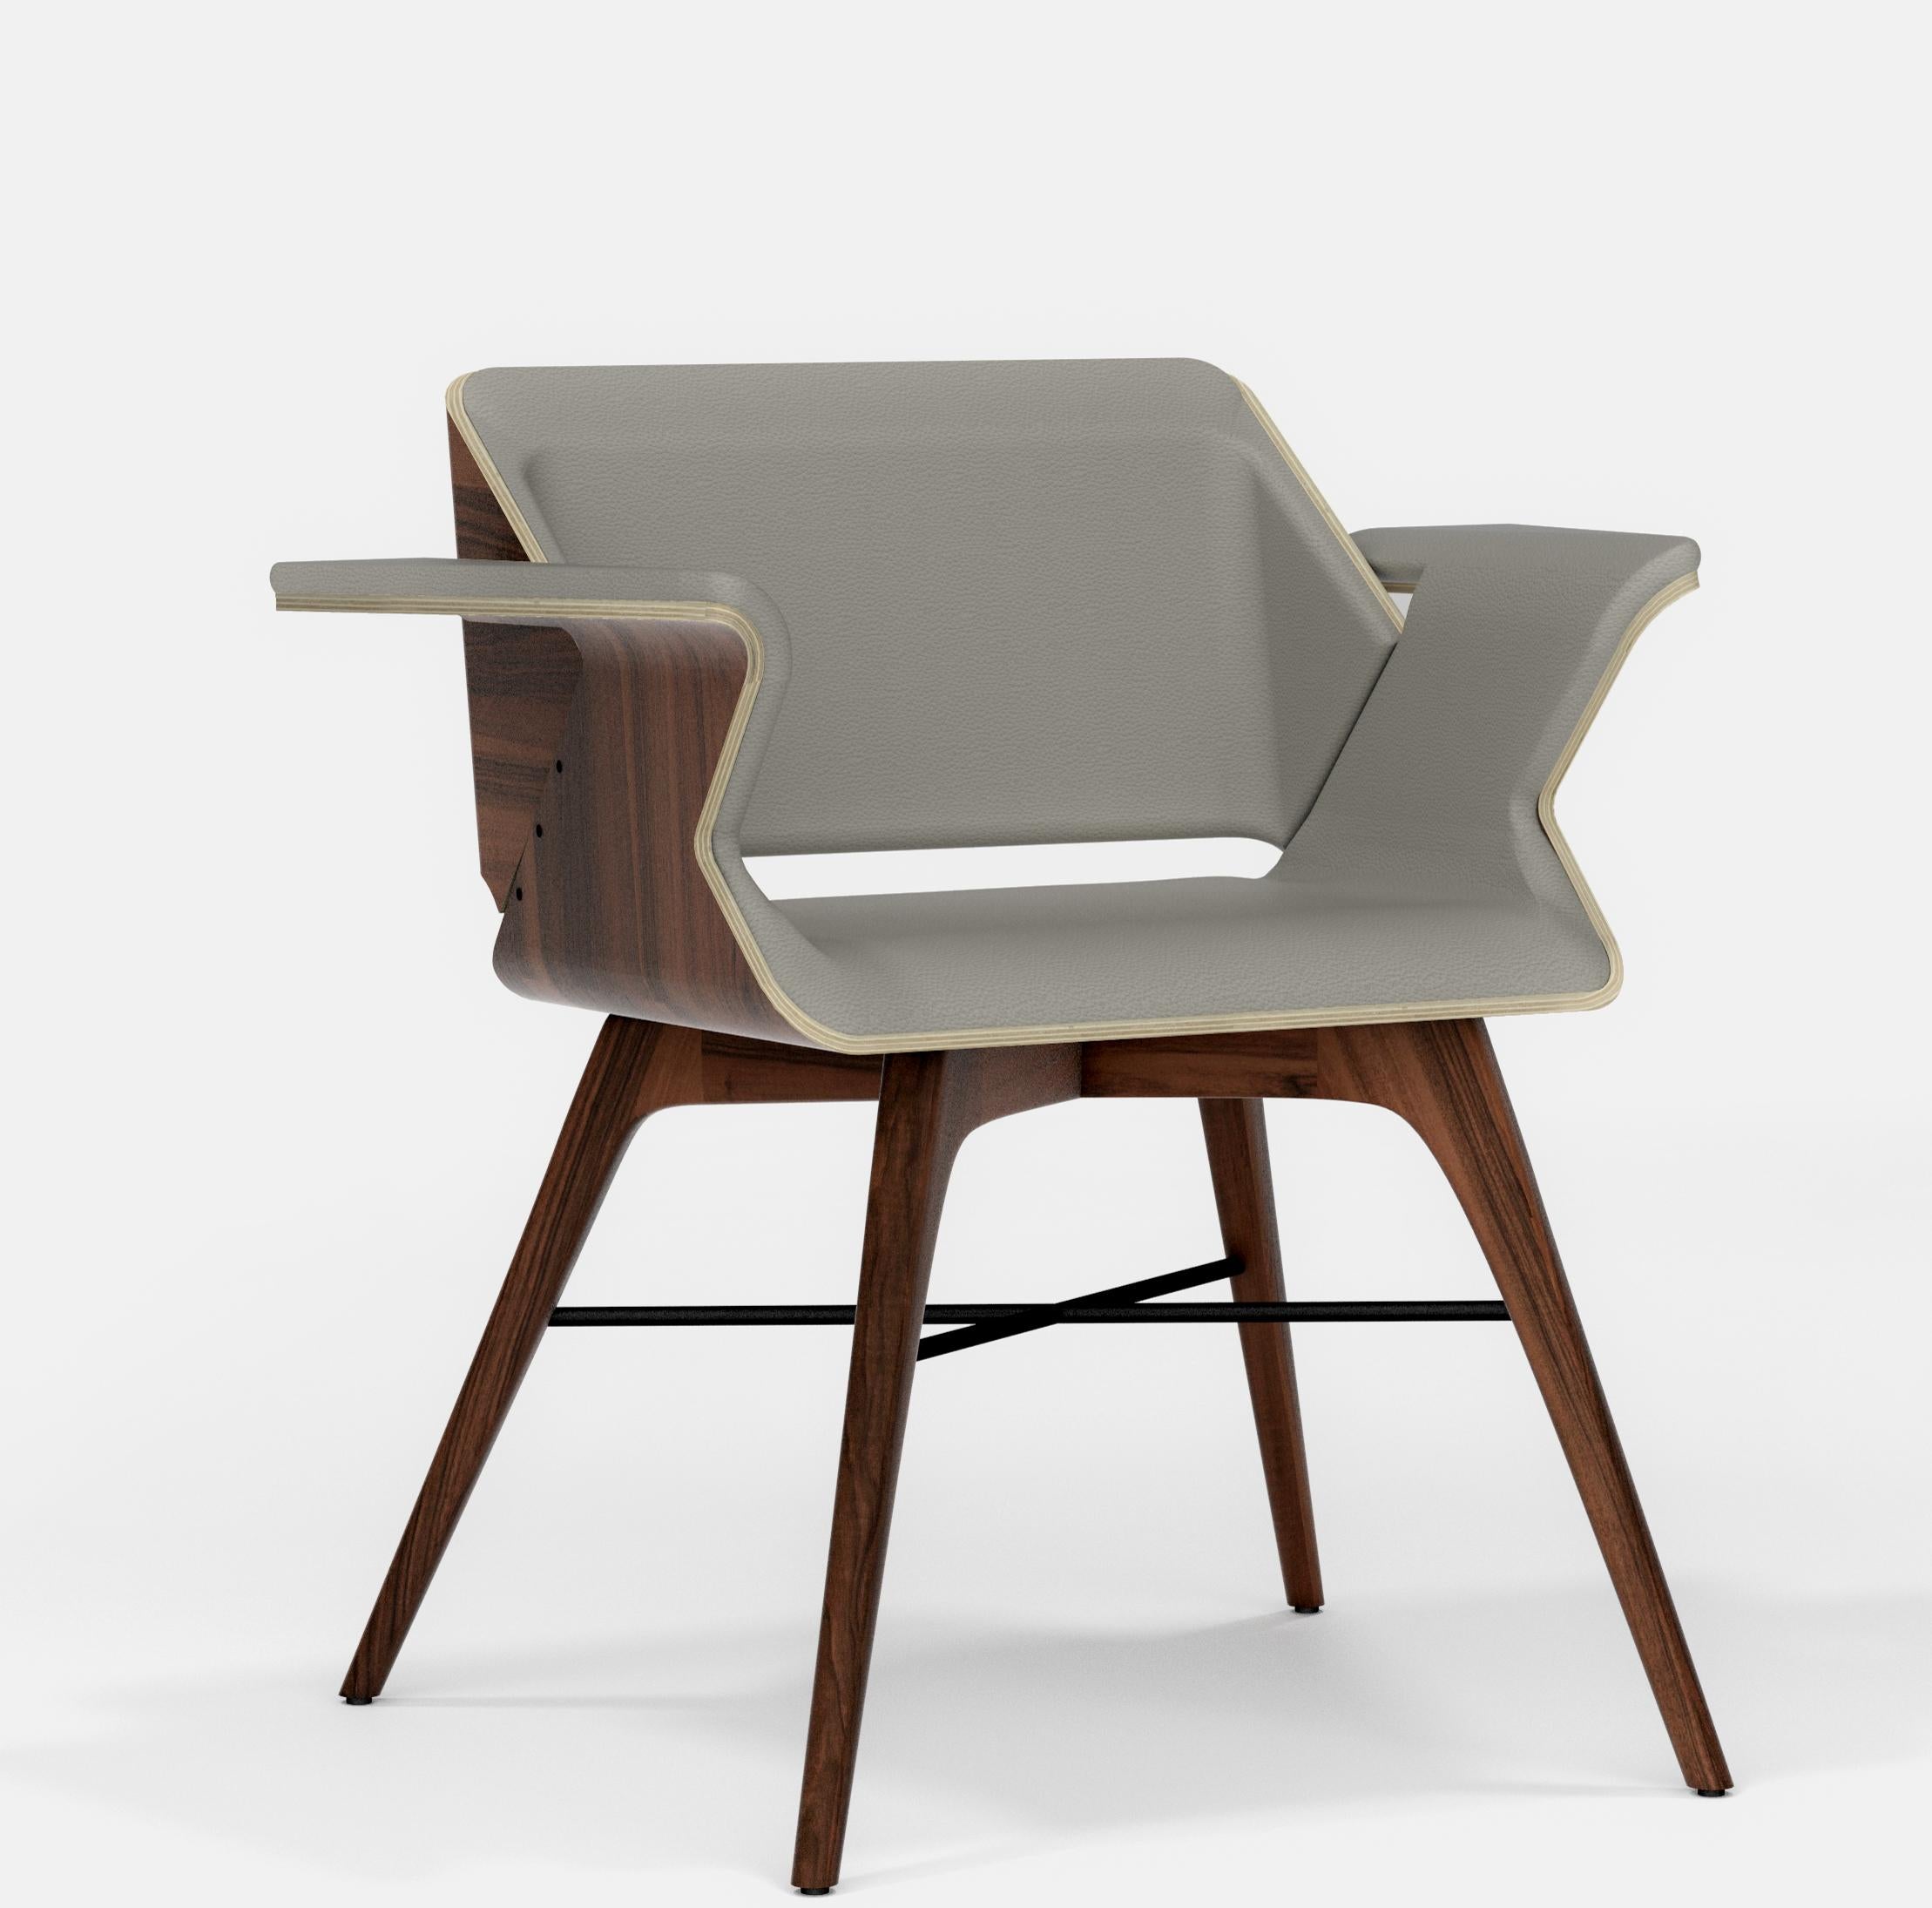 Ash and walnut contemporary chair by Alexandre Caldas
Dimensions: W 52 x D 55 x H 74 cm
Materials: American walnut 100% solid wood, ash and fabric

Structure available in beech, ash, oak and mix wood
Seat available in fabric, leather and